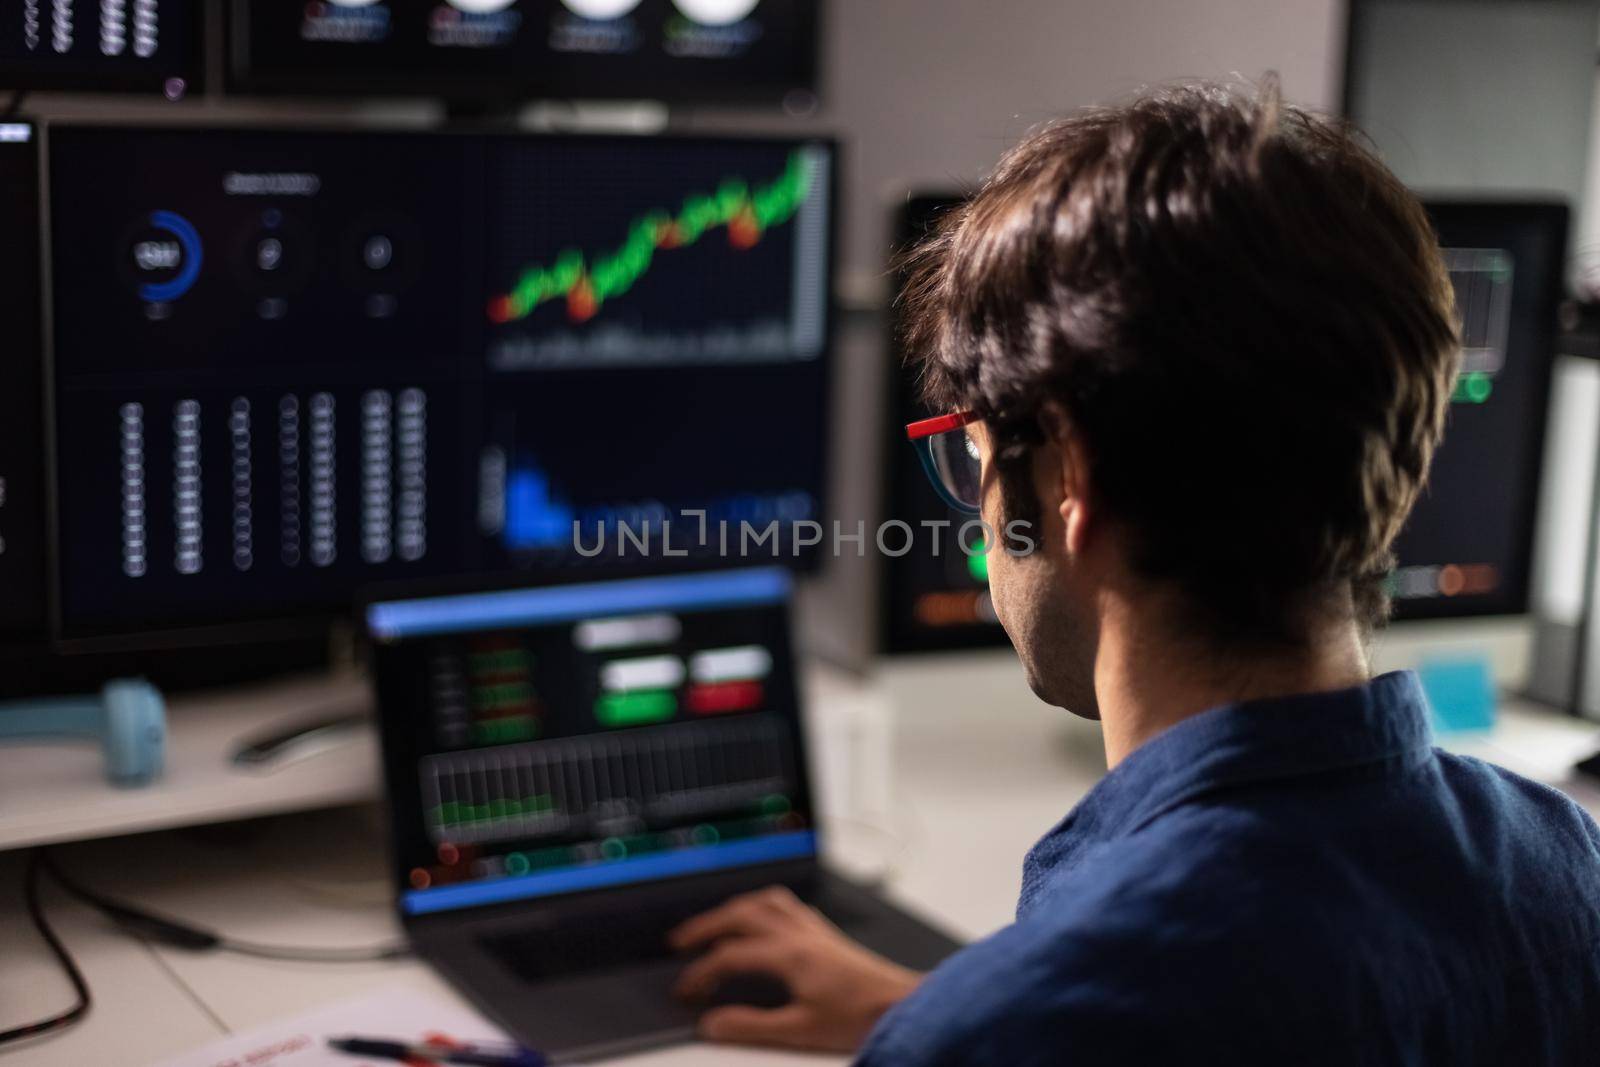 Back view of man in blue shirt working with multiple screens and laptop. Stock market and trading. Business concept.